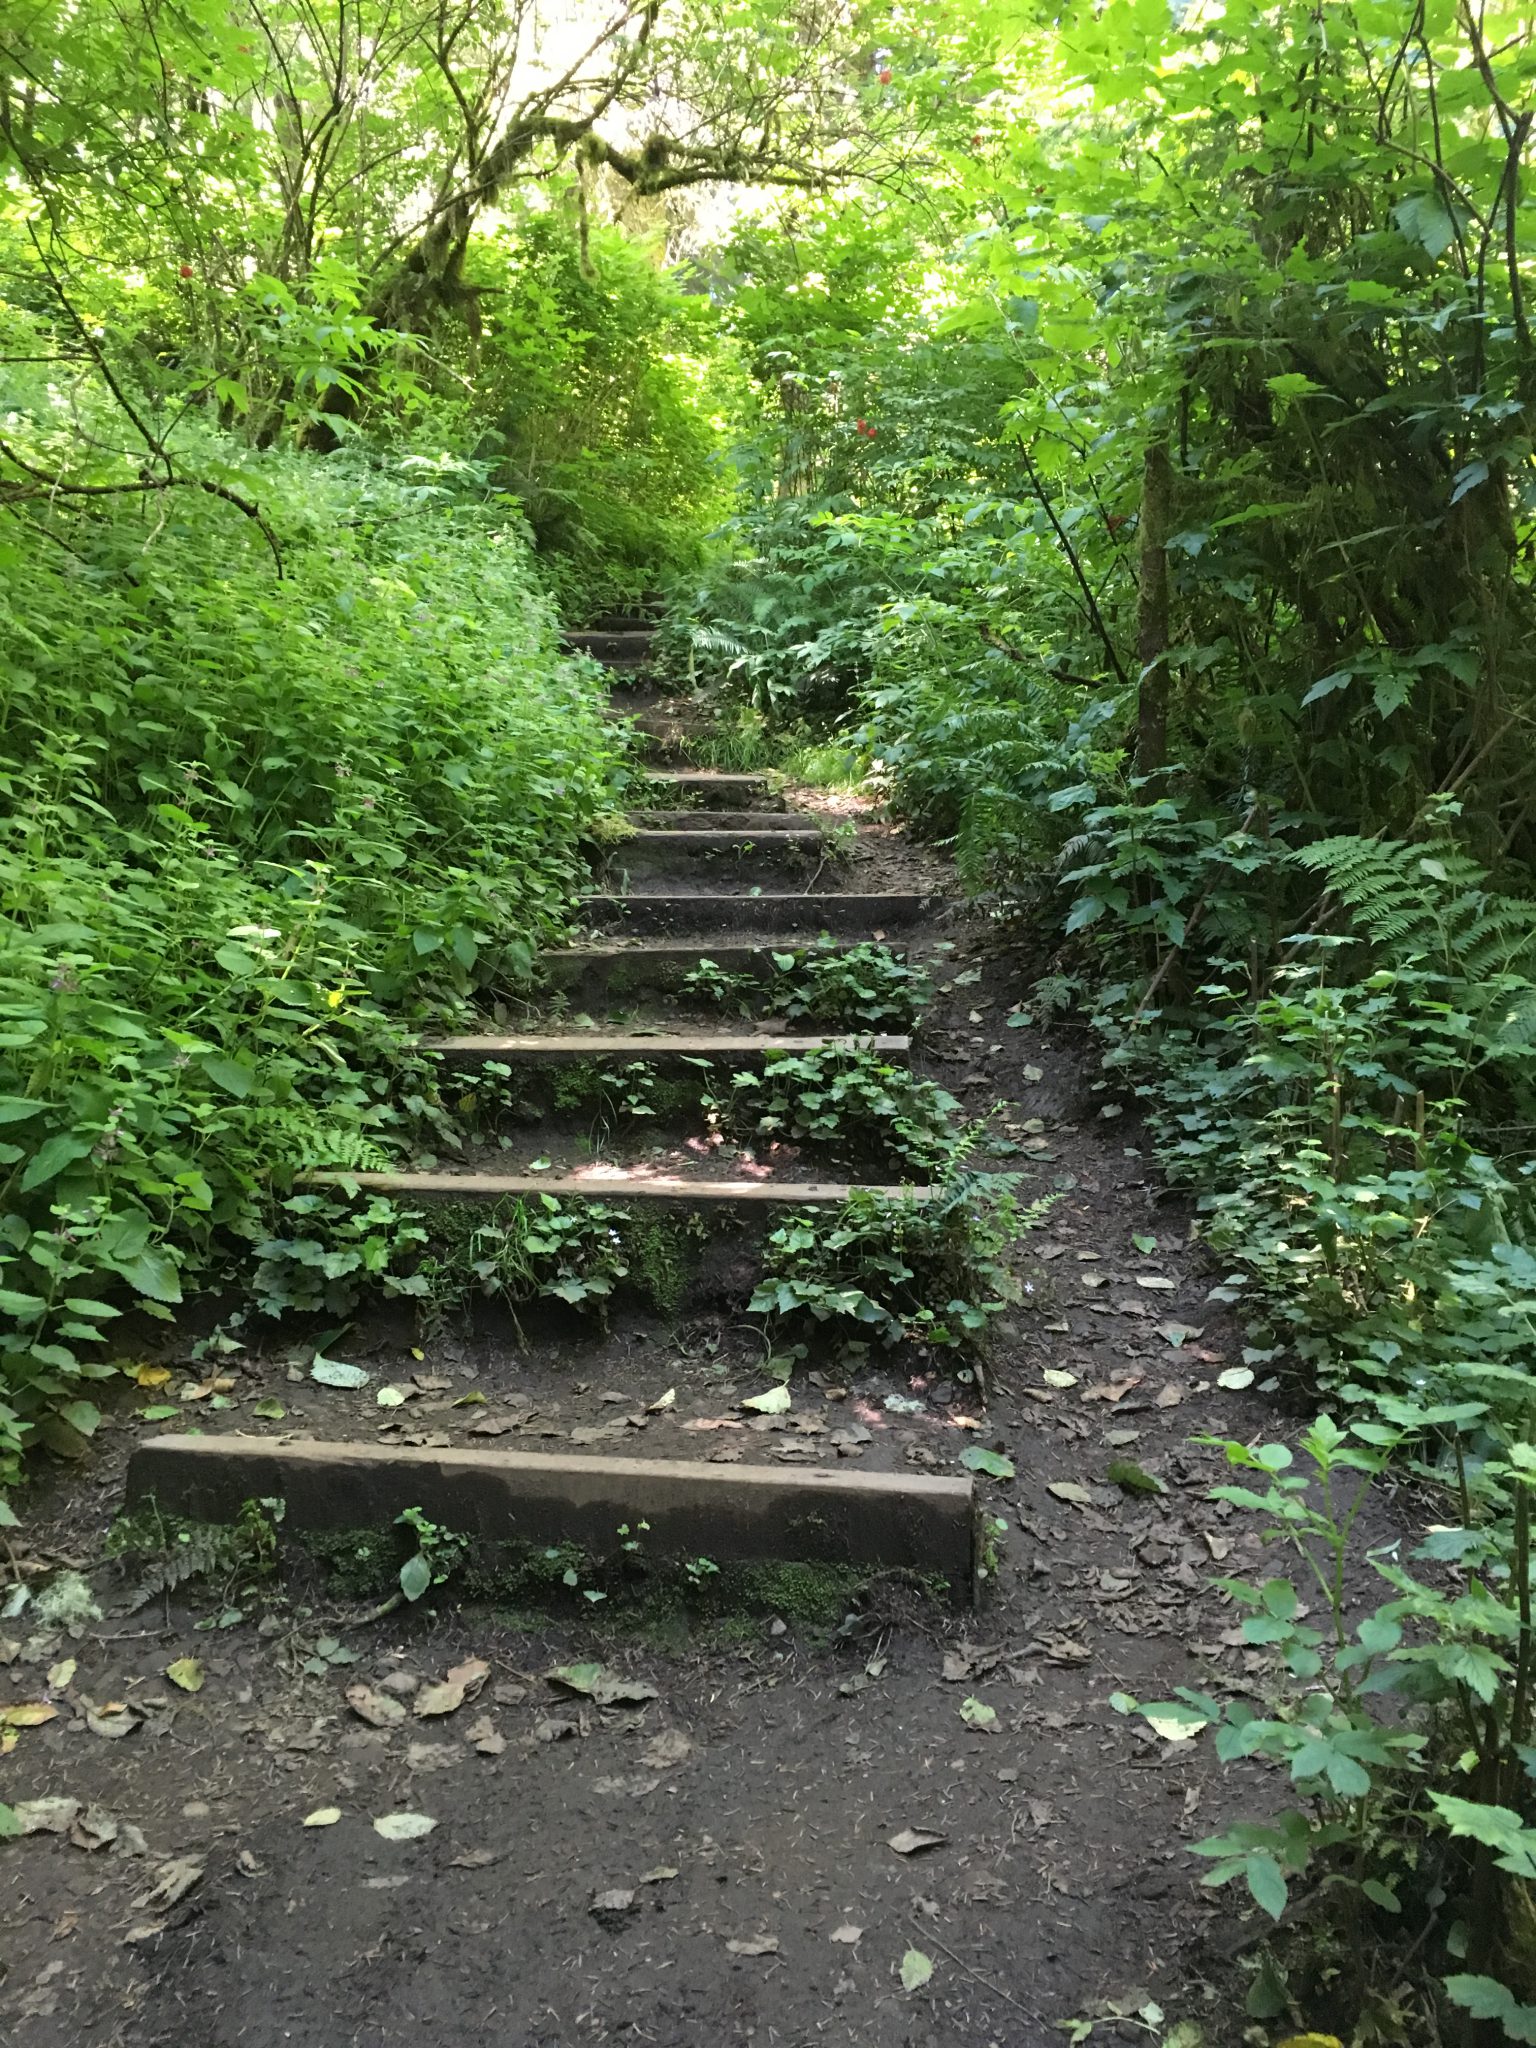 You'll encounter some steep steps on your hike up to Cascade Head